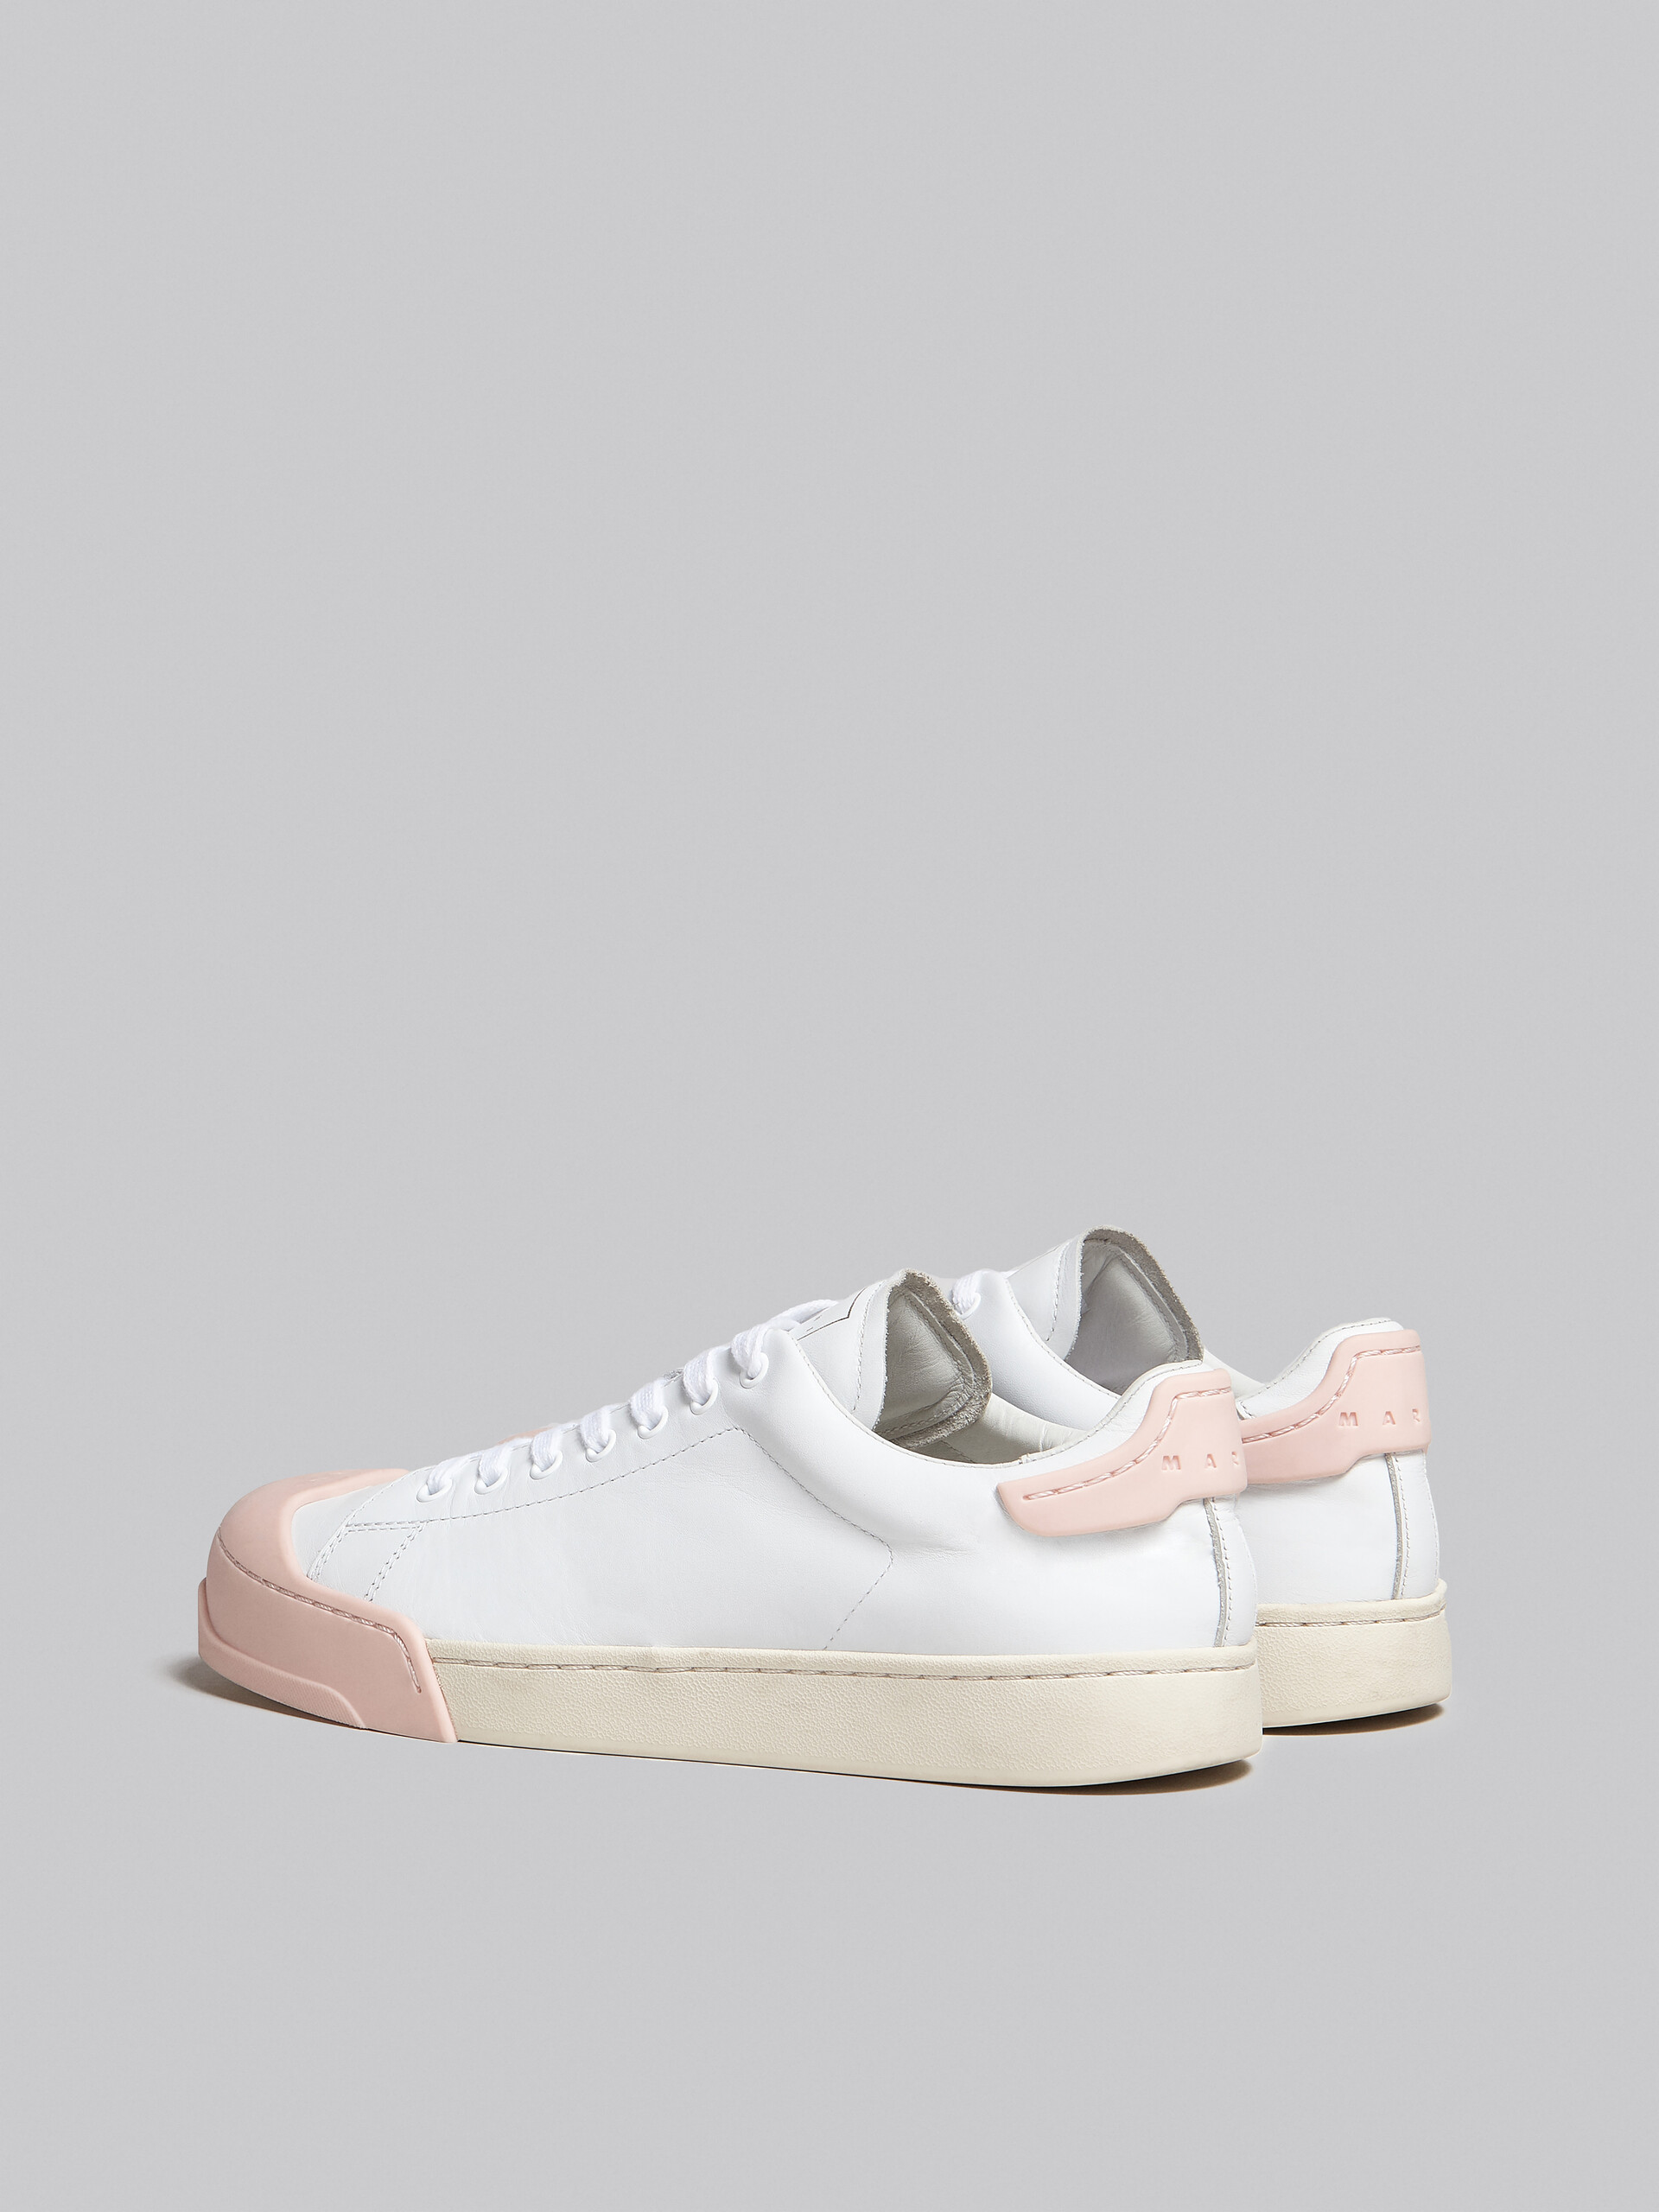 Dada Bumper sneaker in white and pink leather - Sneakers - Image 3